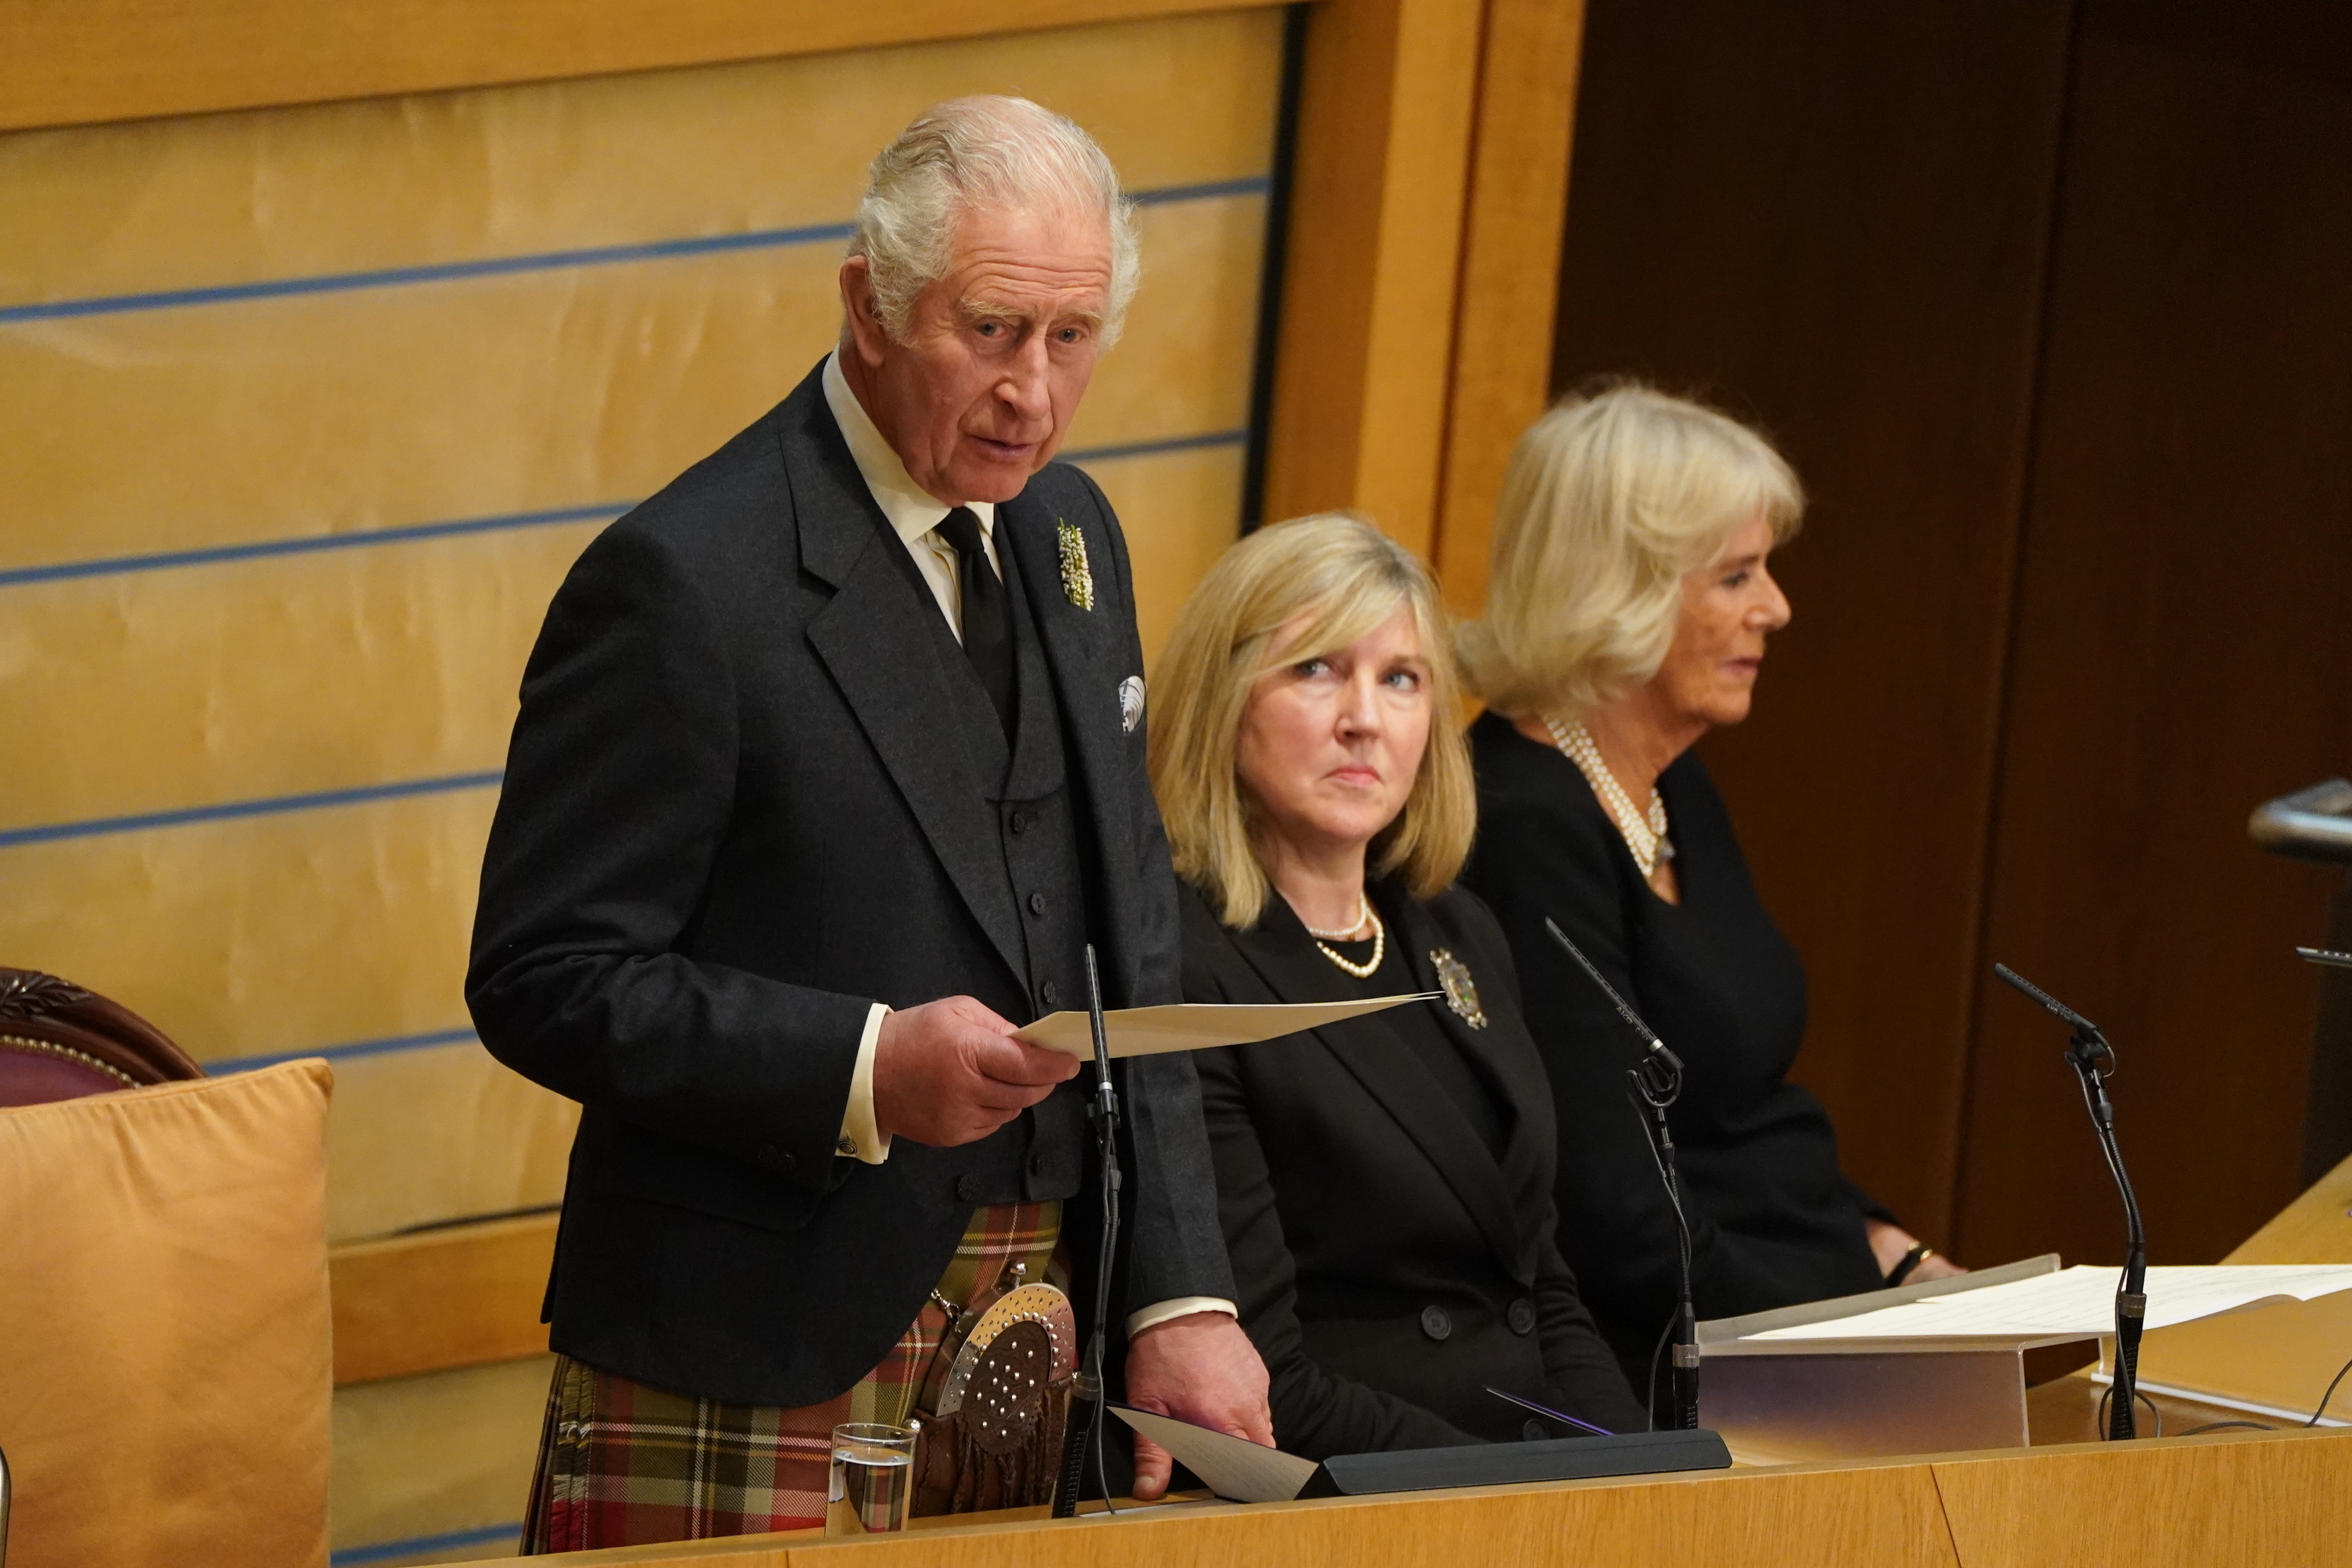 King Charles III speaking in the Scottish Parliament after hearing tributes to the Queen. Andrew Milligan/PA